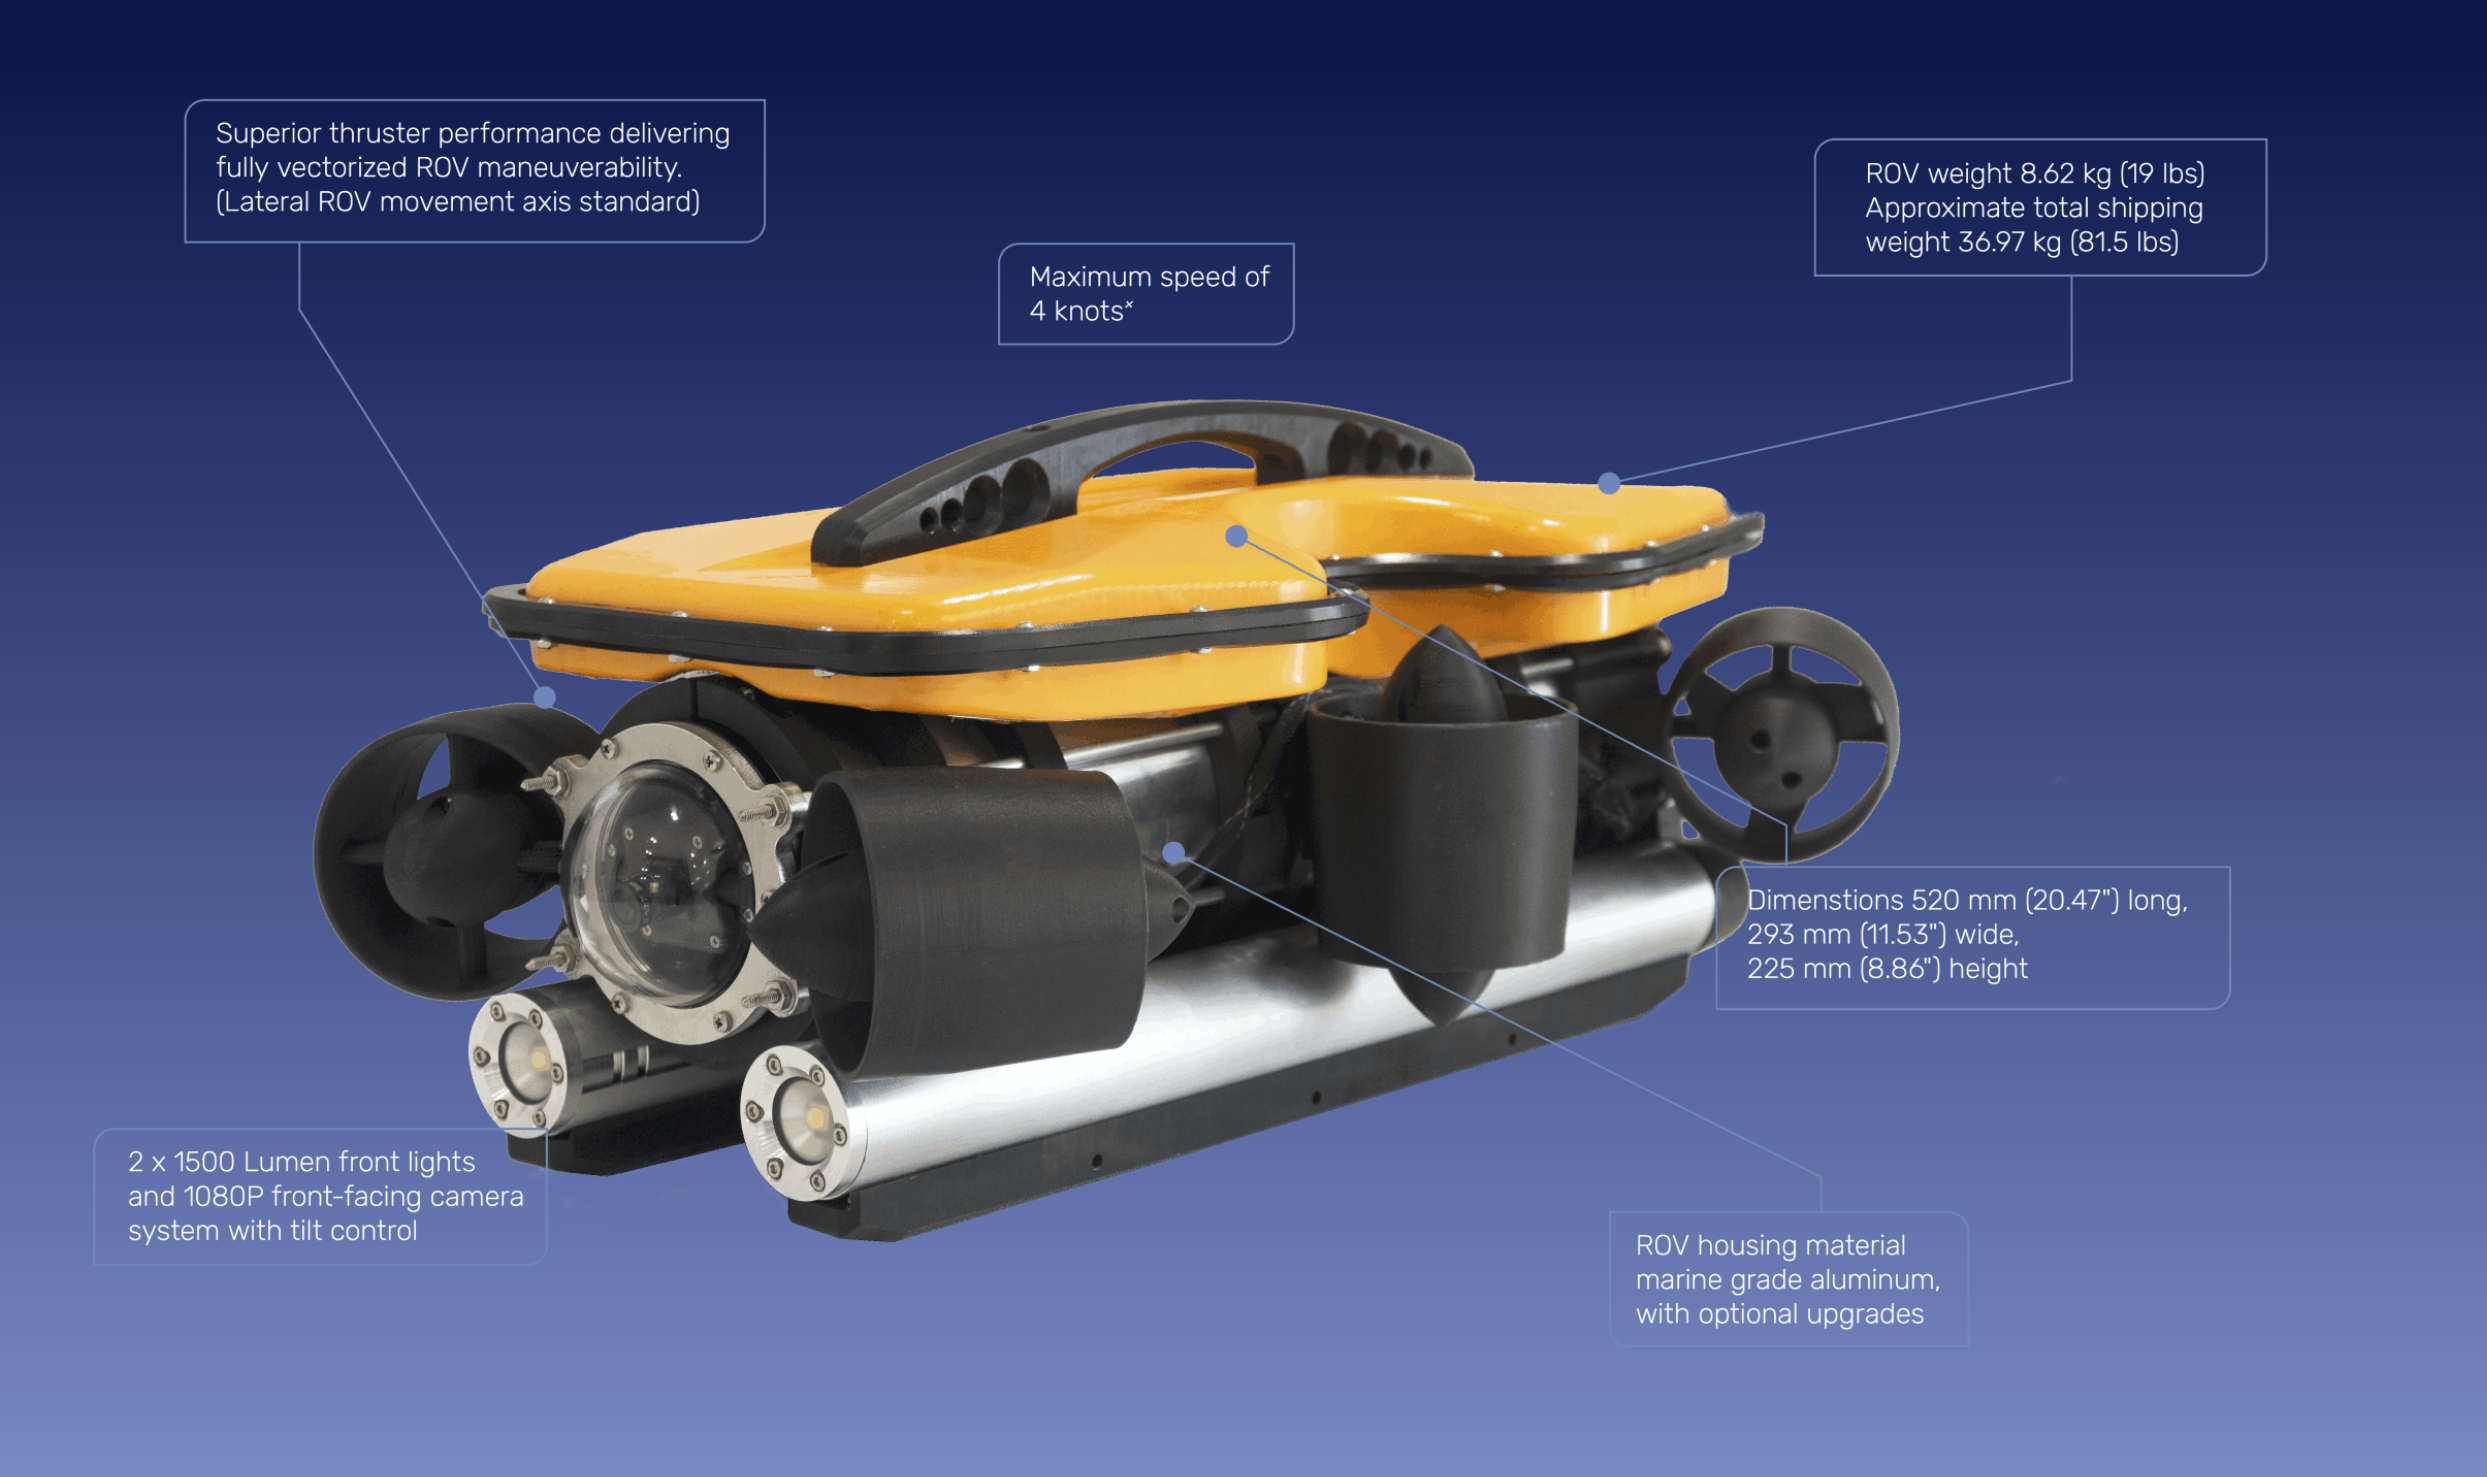 Oceanus Mini ROV is loaded with powerful features